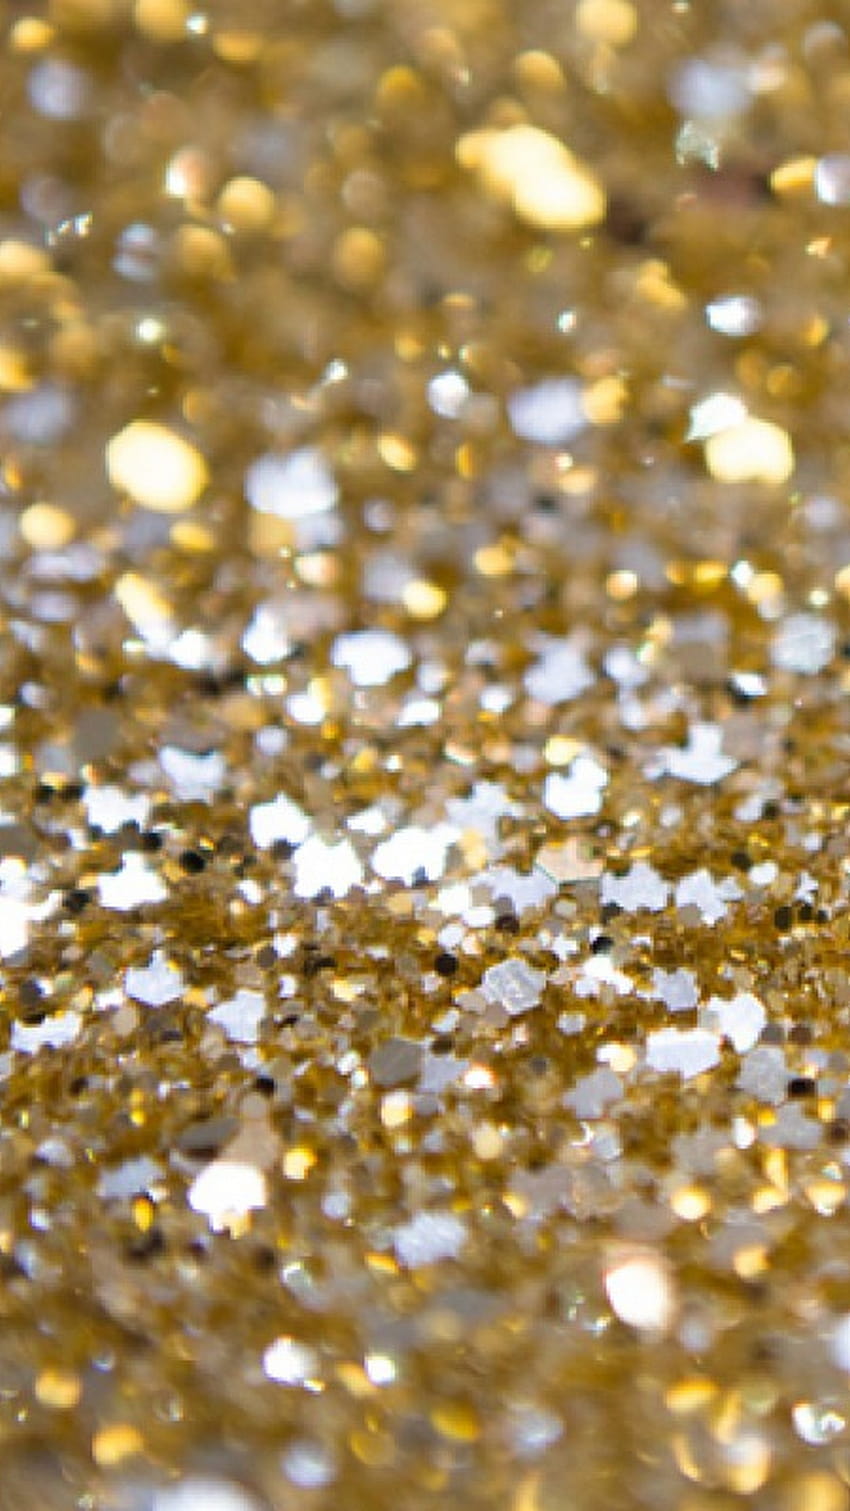 1080x1920, Gold Sparkle Iphone Backgrounds Lovely, glitter iphone gold HD phone wallpaper